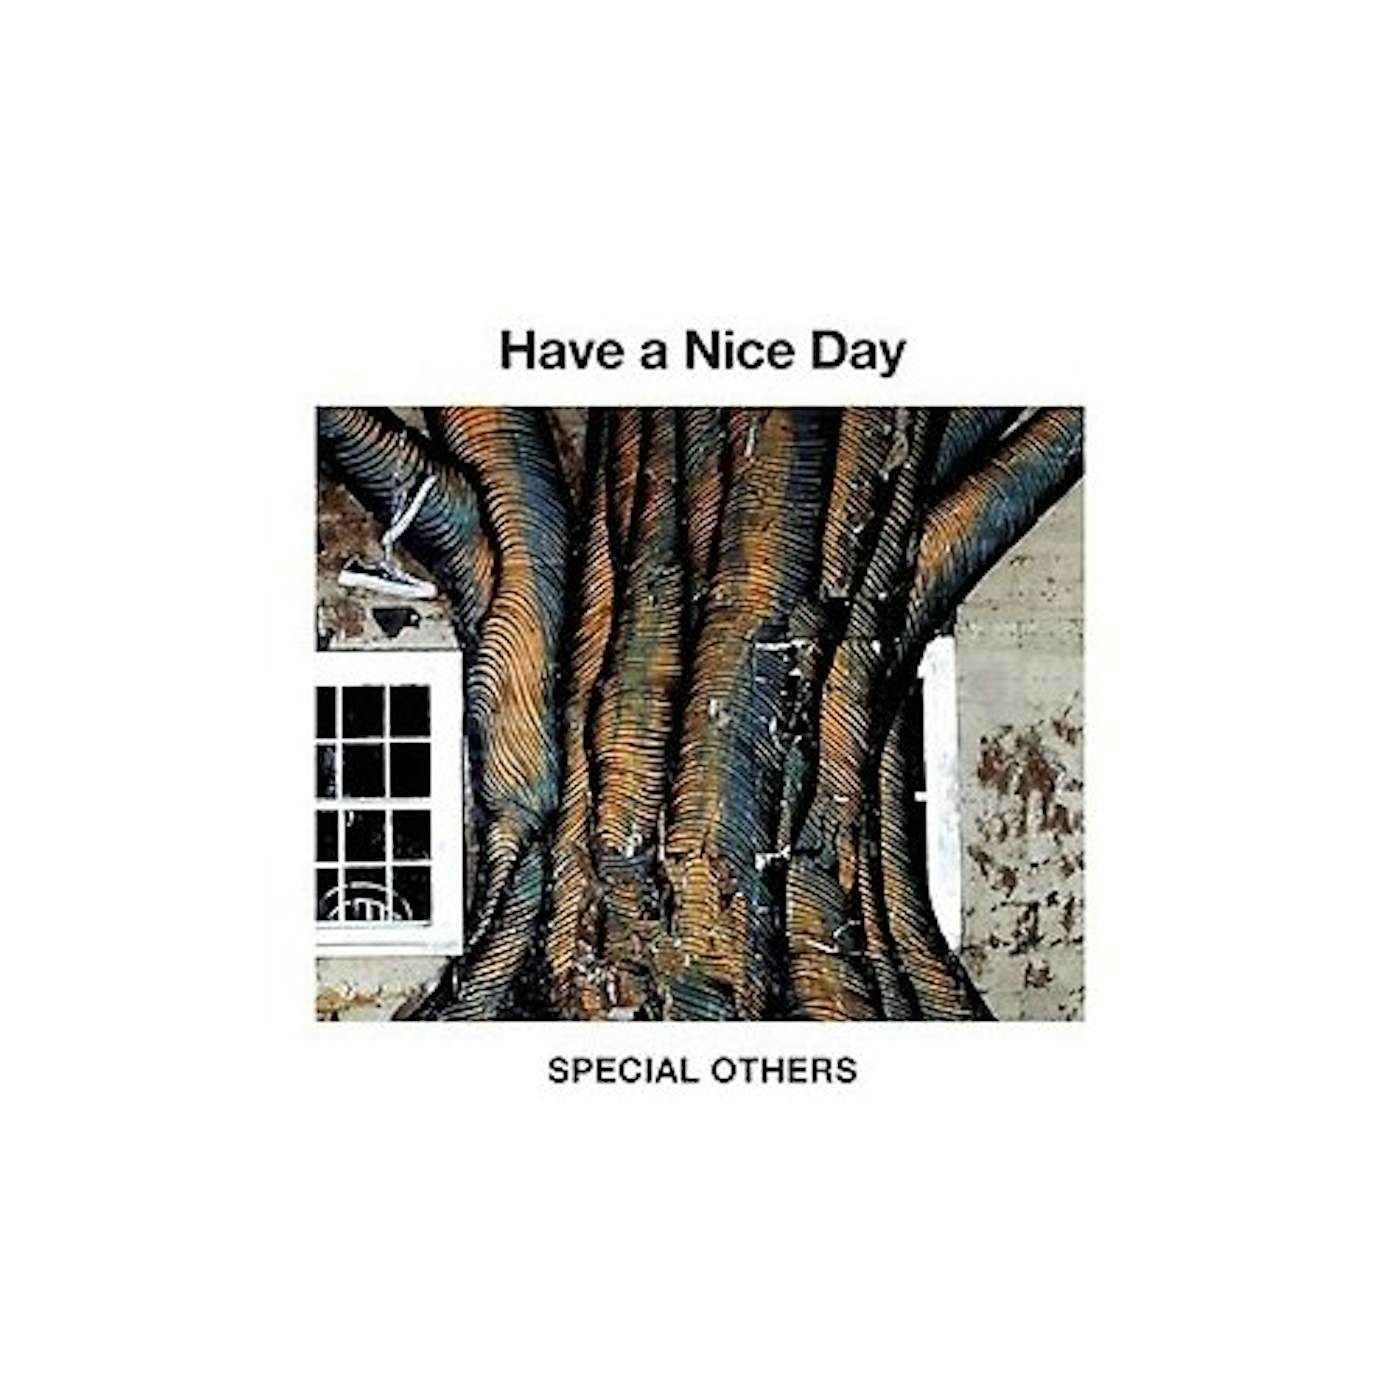 SPECIAL OTHERS HAVE A NICE DAY CD